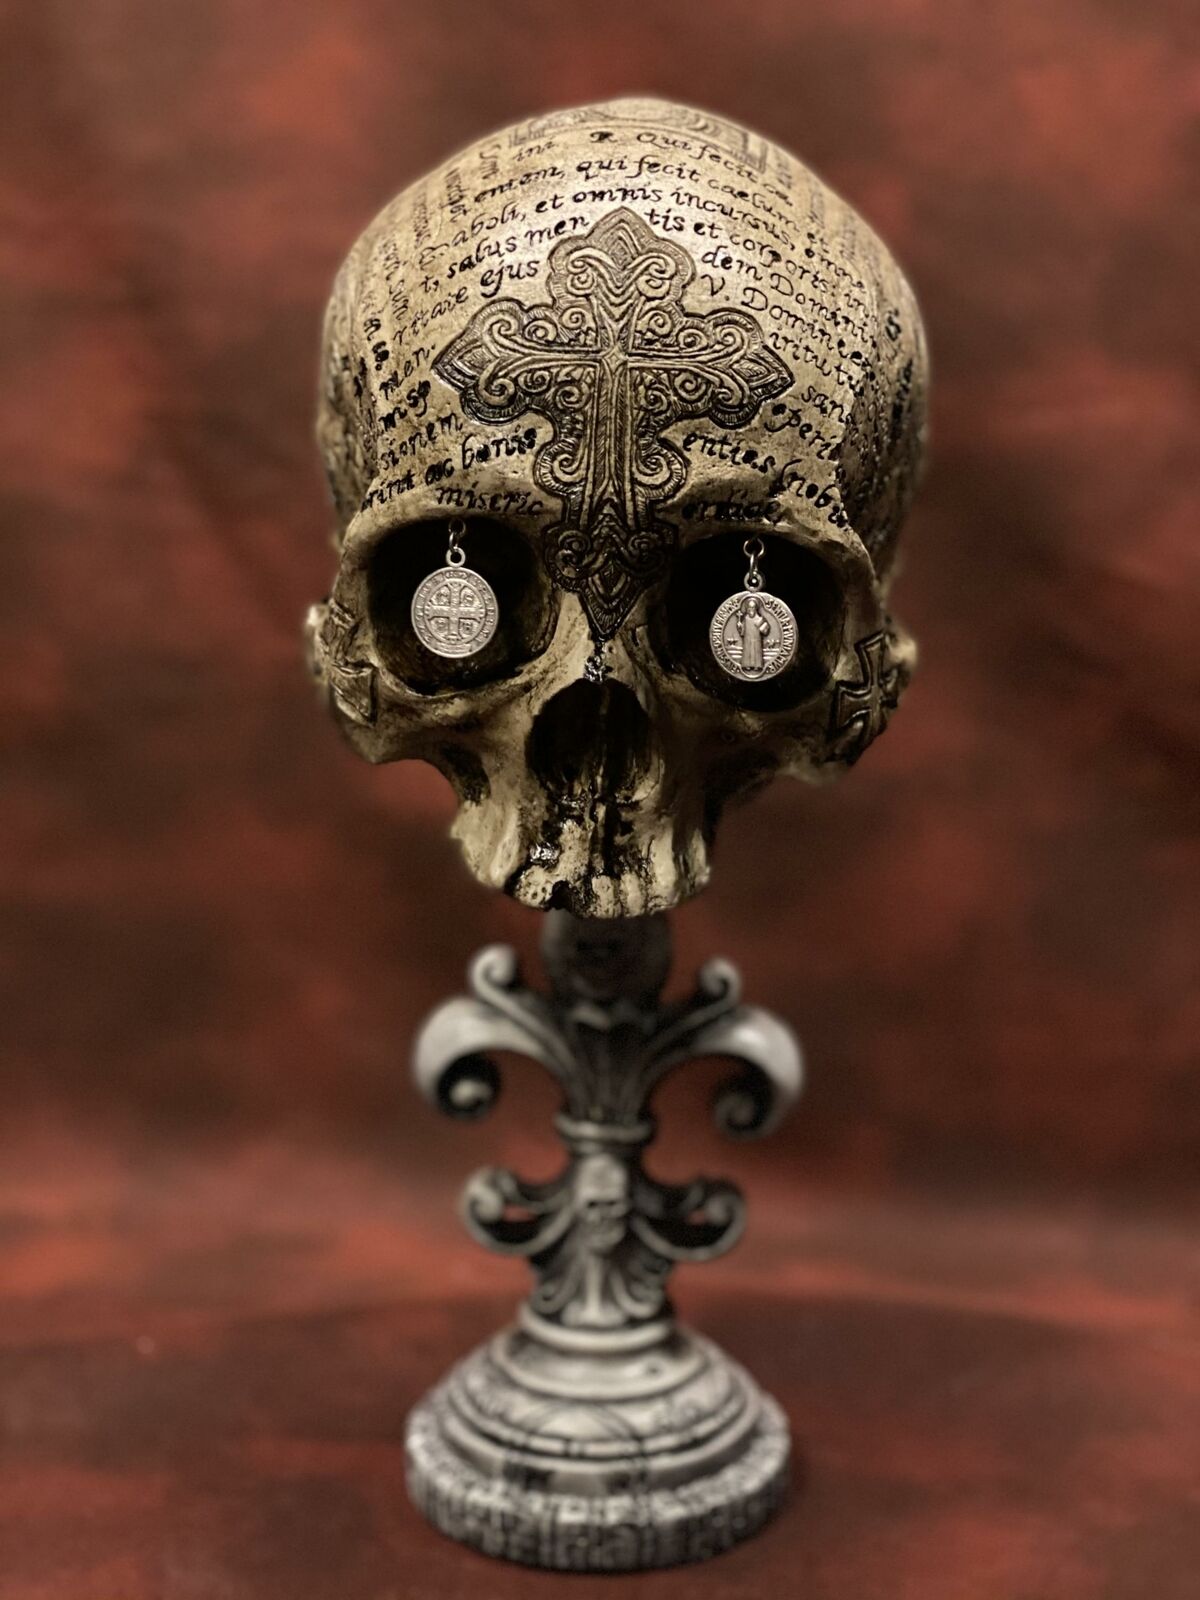 St. Benedict Skull Real Human Skull RESIN REPLICA by Zane Wylie